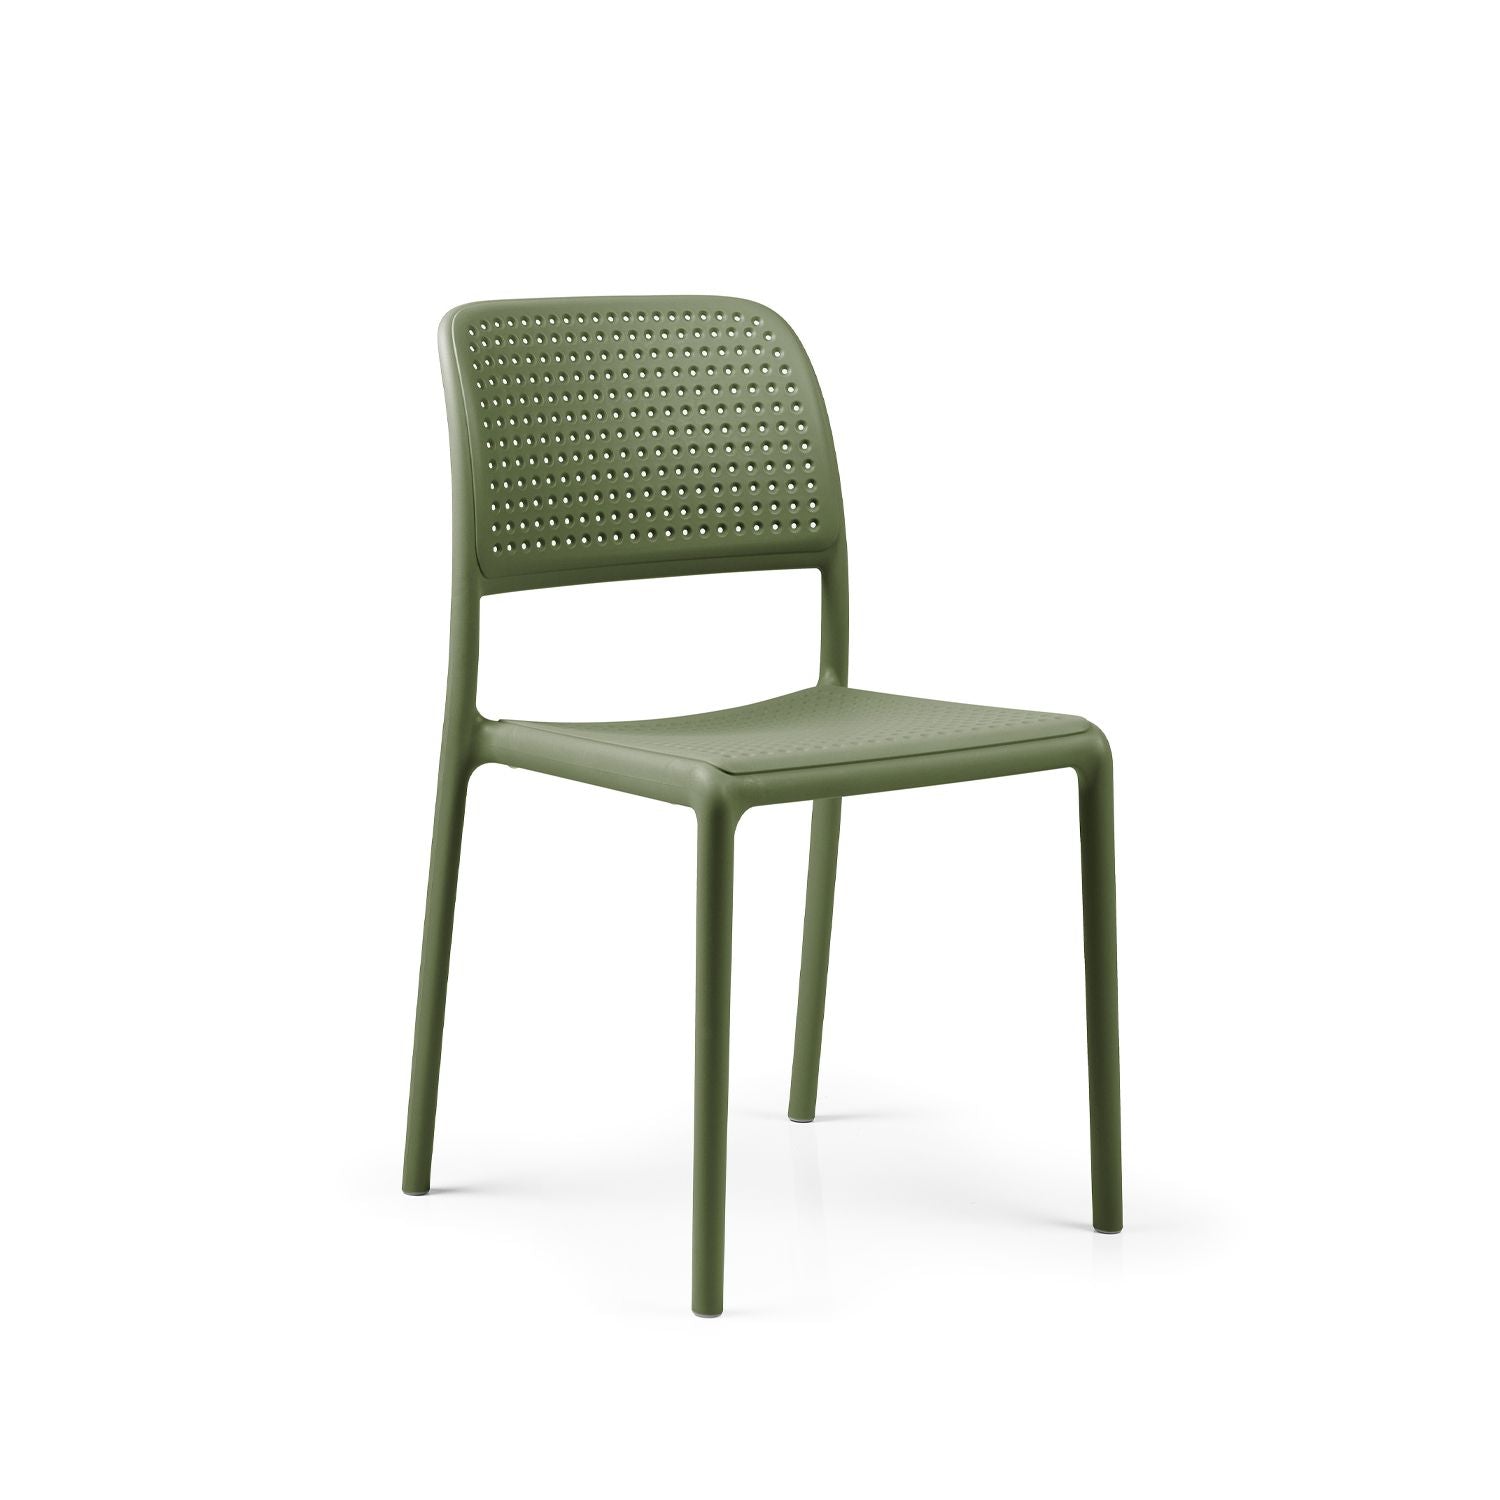 Bora Armless Chair By Nardi - Set Of 6 - Olive